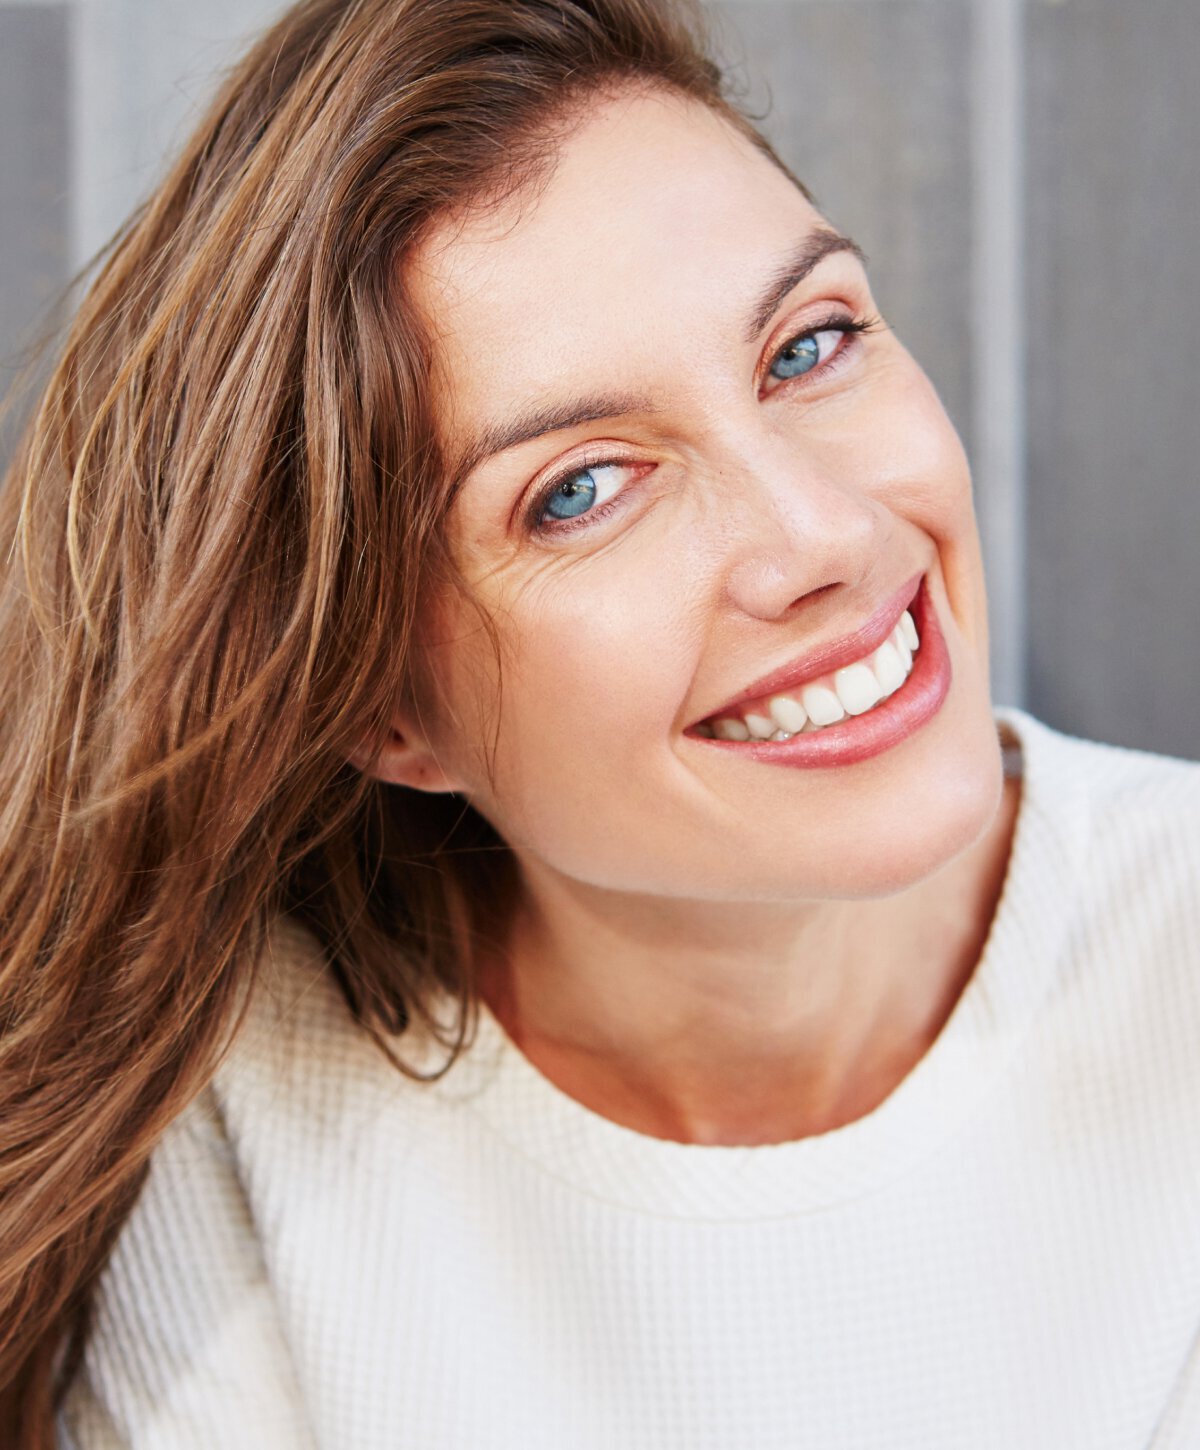 Woman after brow lift smiling